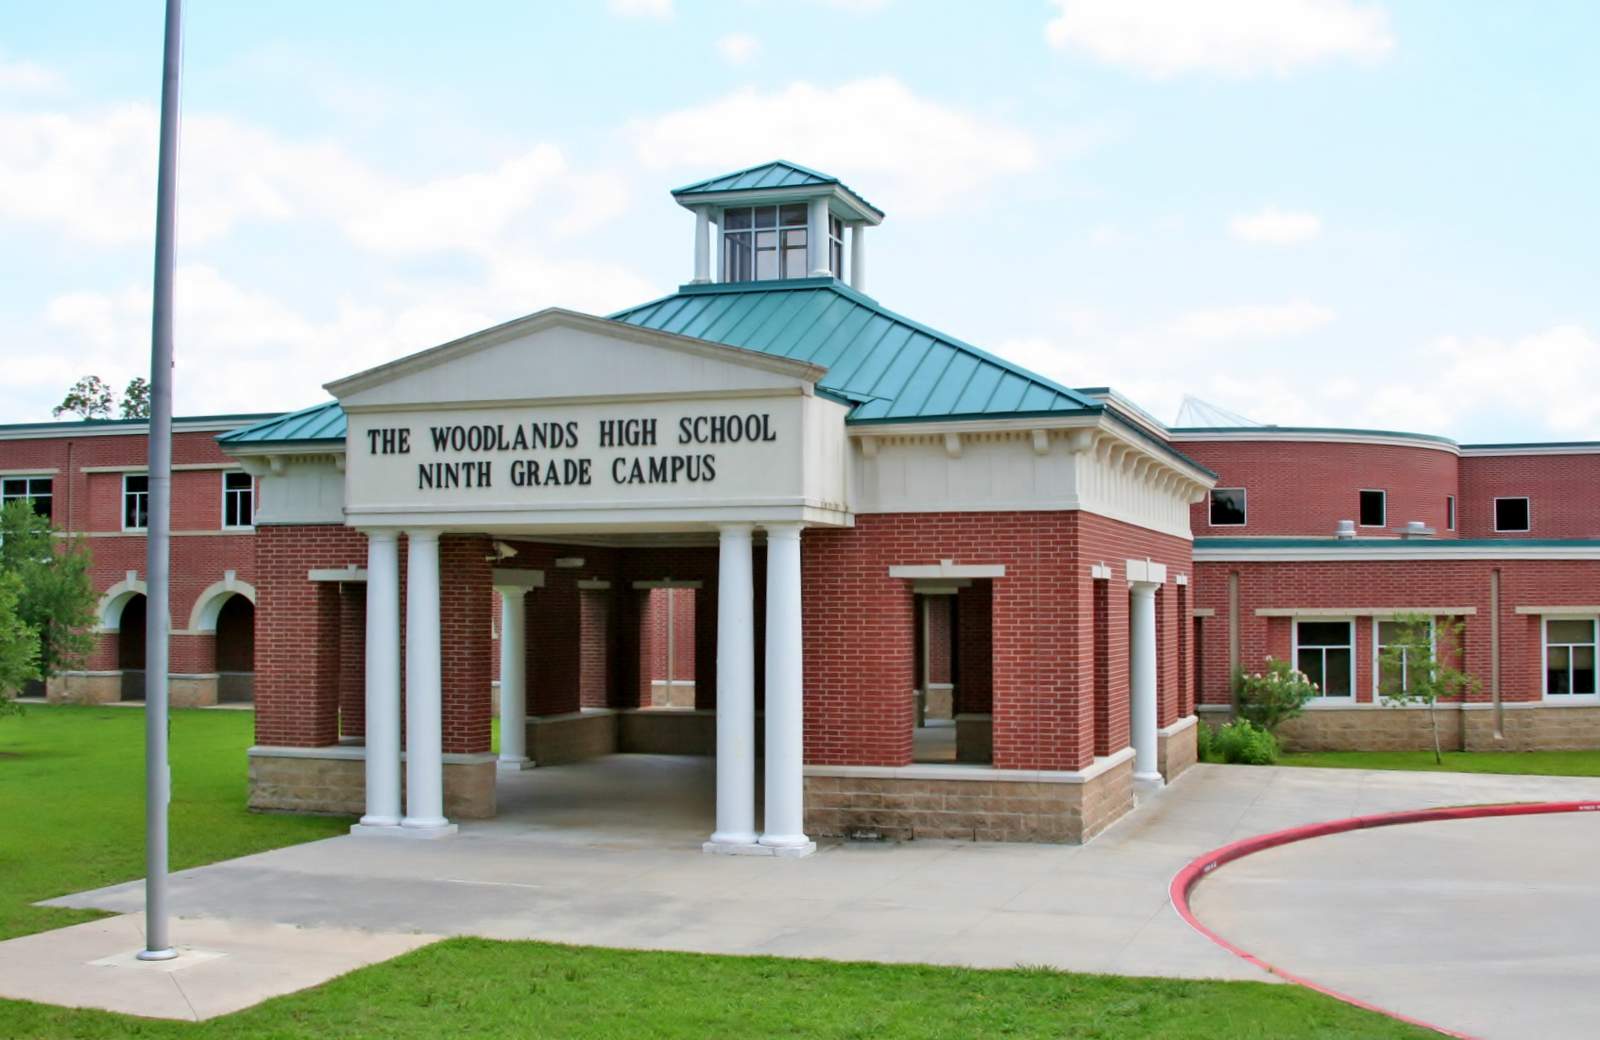 Student who attended strength and conditioning camp at The Woodlands High School 9th Grade Campus tests positive for COVID-19